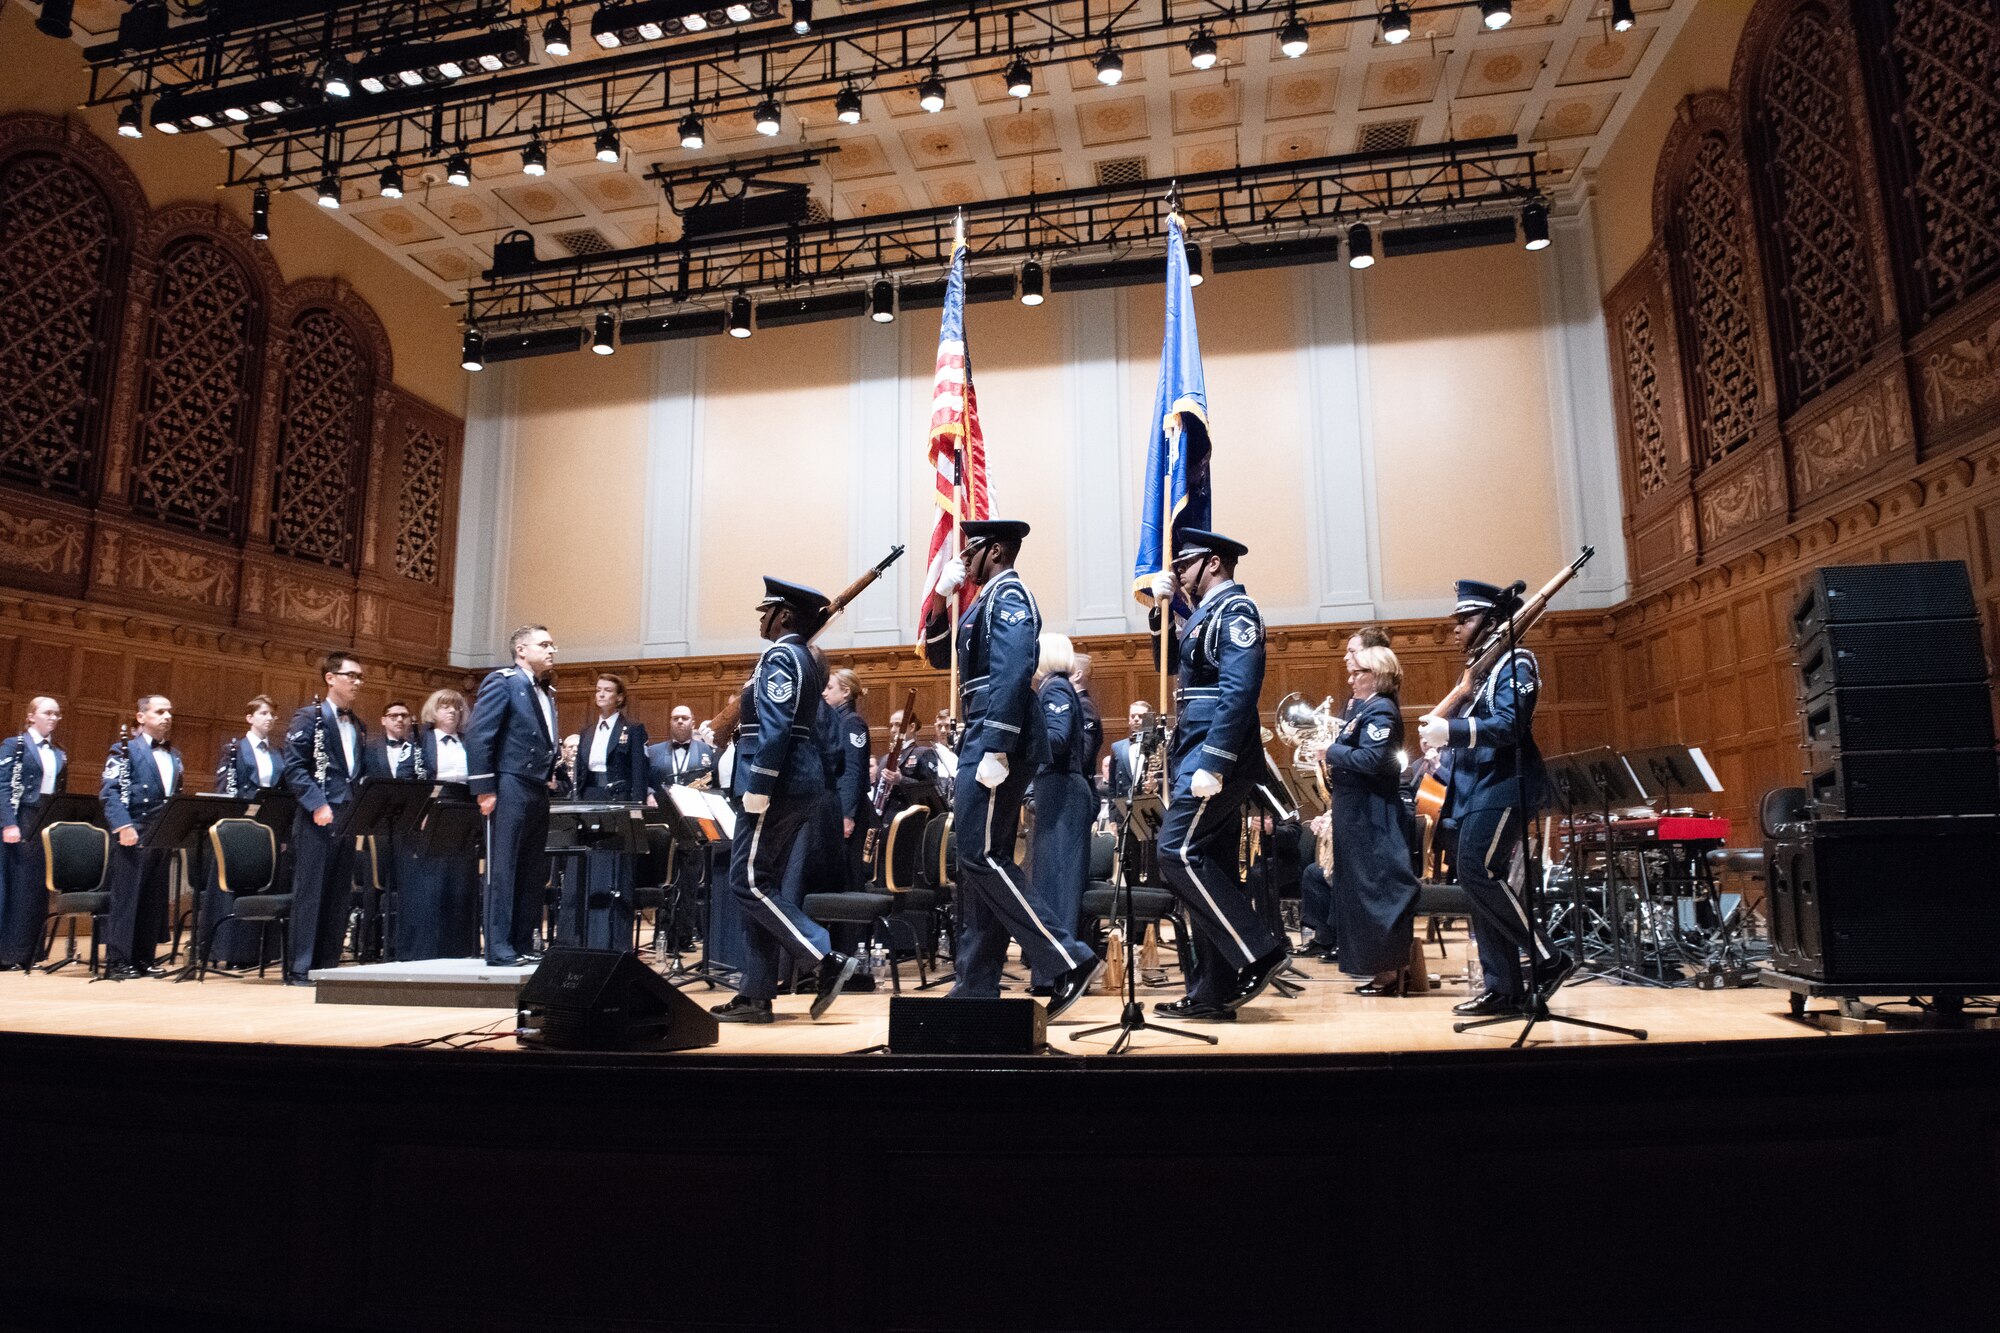 The 910th Airlift Wing base color guard presents the colors during a U.S. Air Force Heritage of America Band concert at Stambaugh Auditorium in Youngstown, Ohio, Nov. 18, 2019.